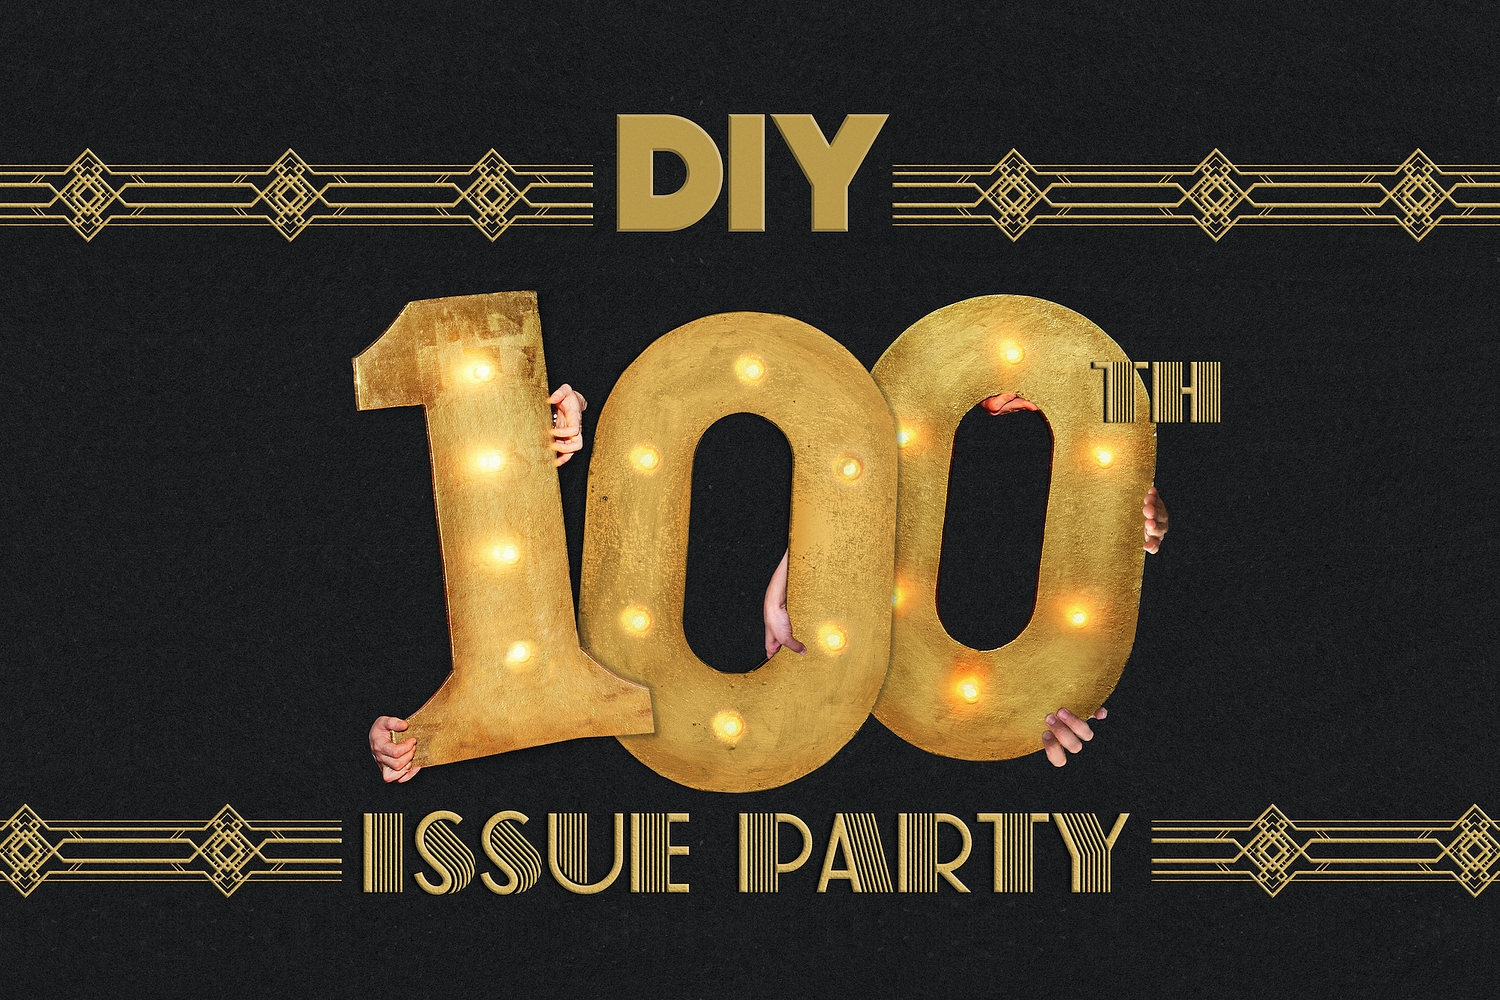 Matt Maltese, Black Honey and Spector to play DIY's 100th issue party